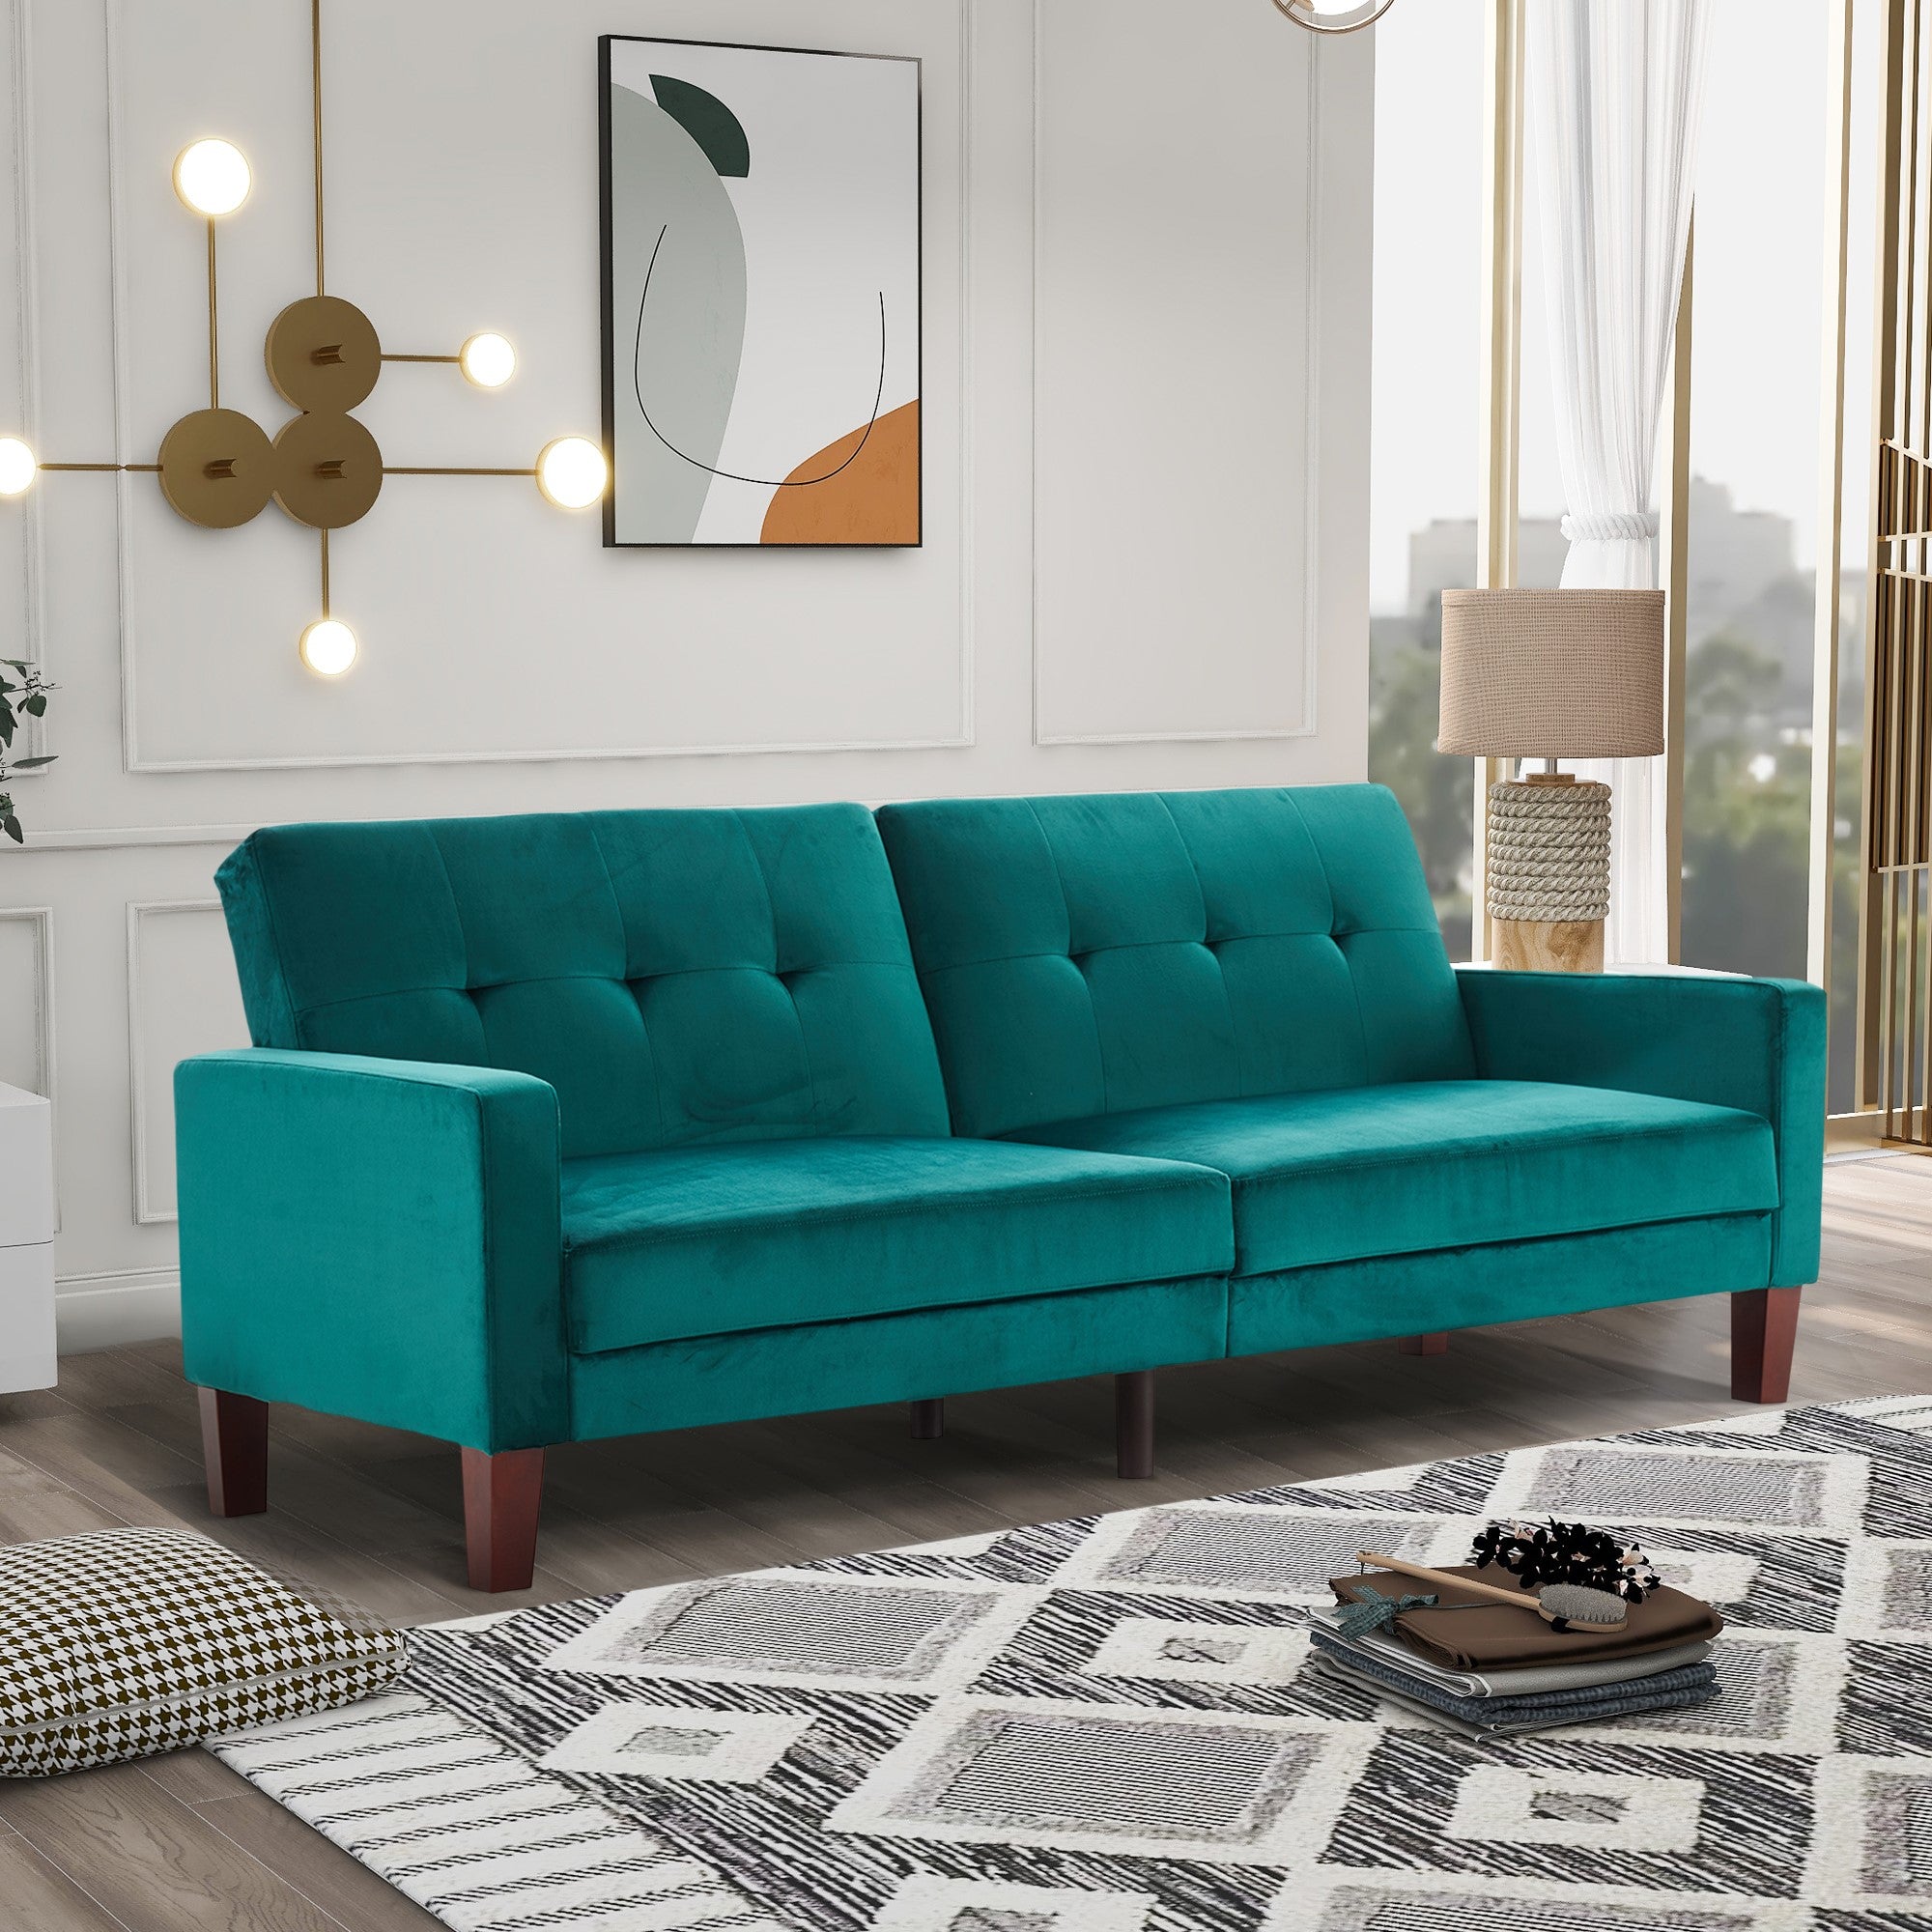 Teal Upholstery Fabric Sofa Bed